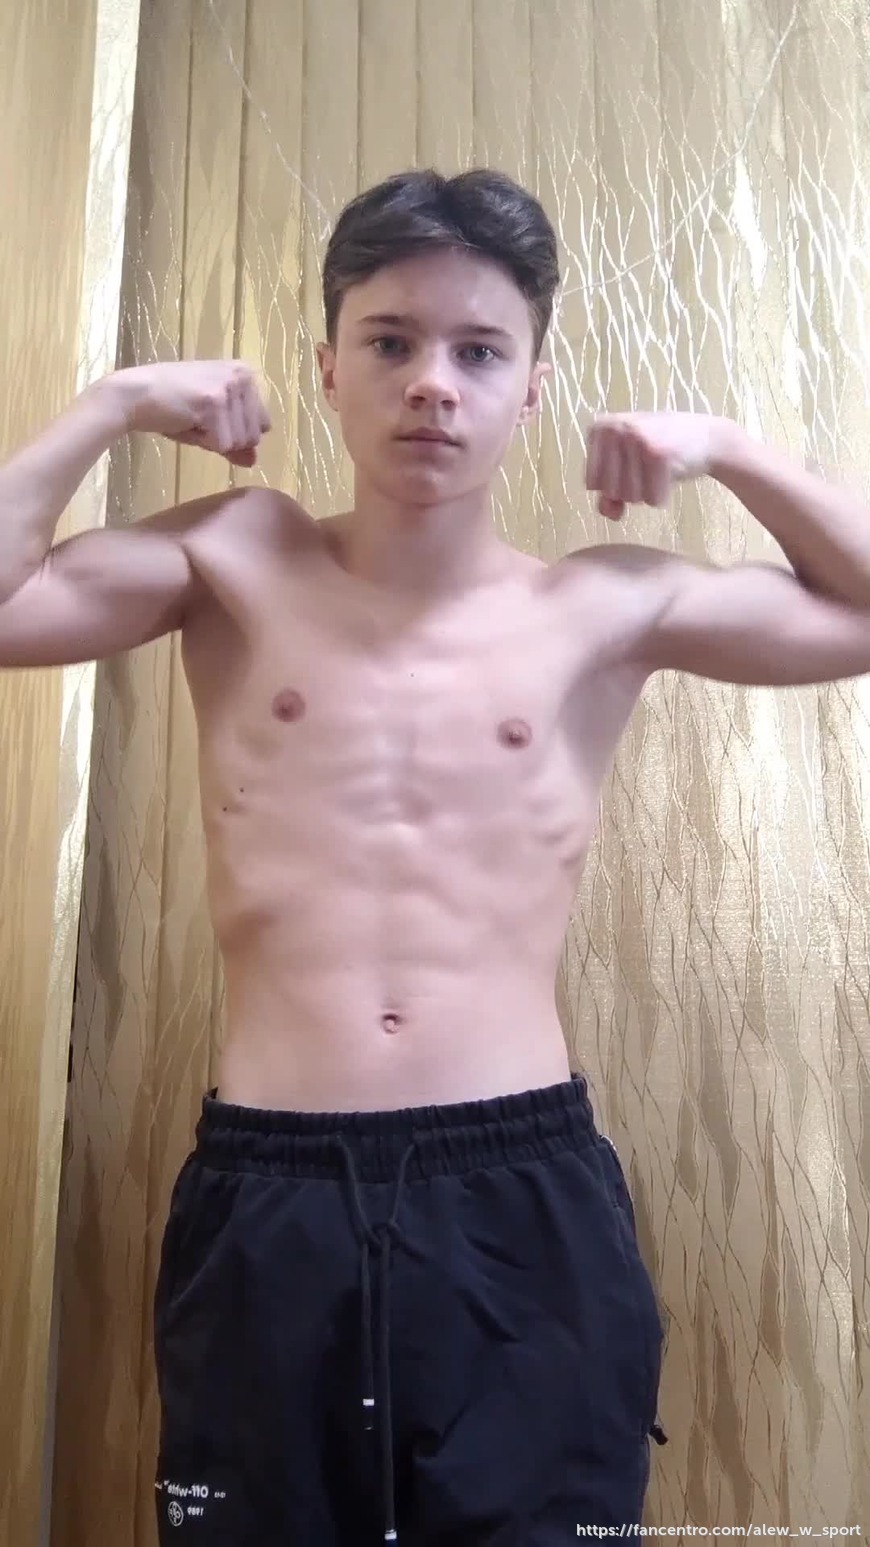 New hot flexing with cum 1 background